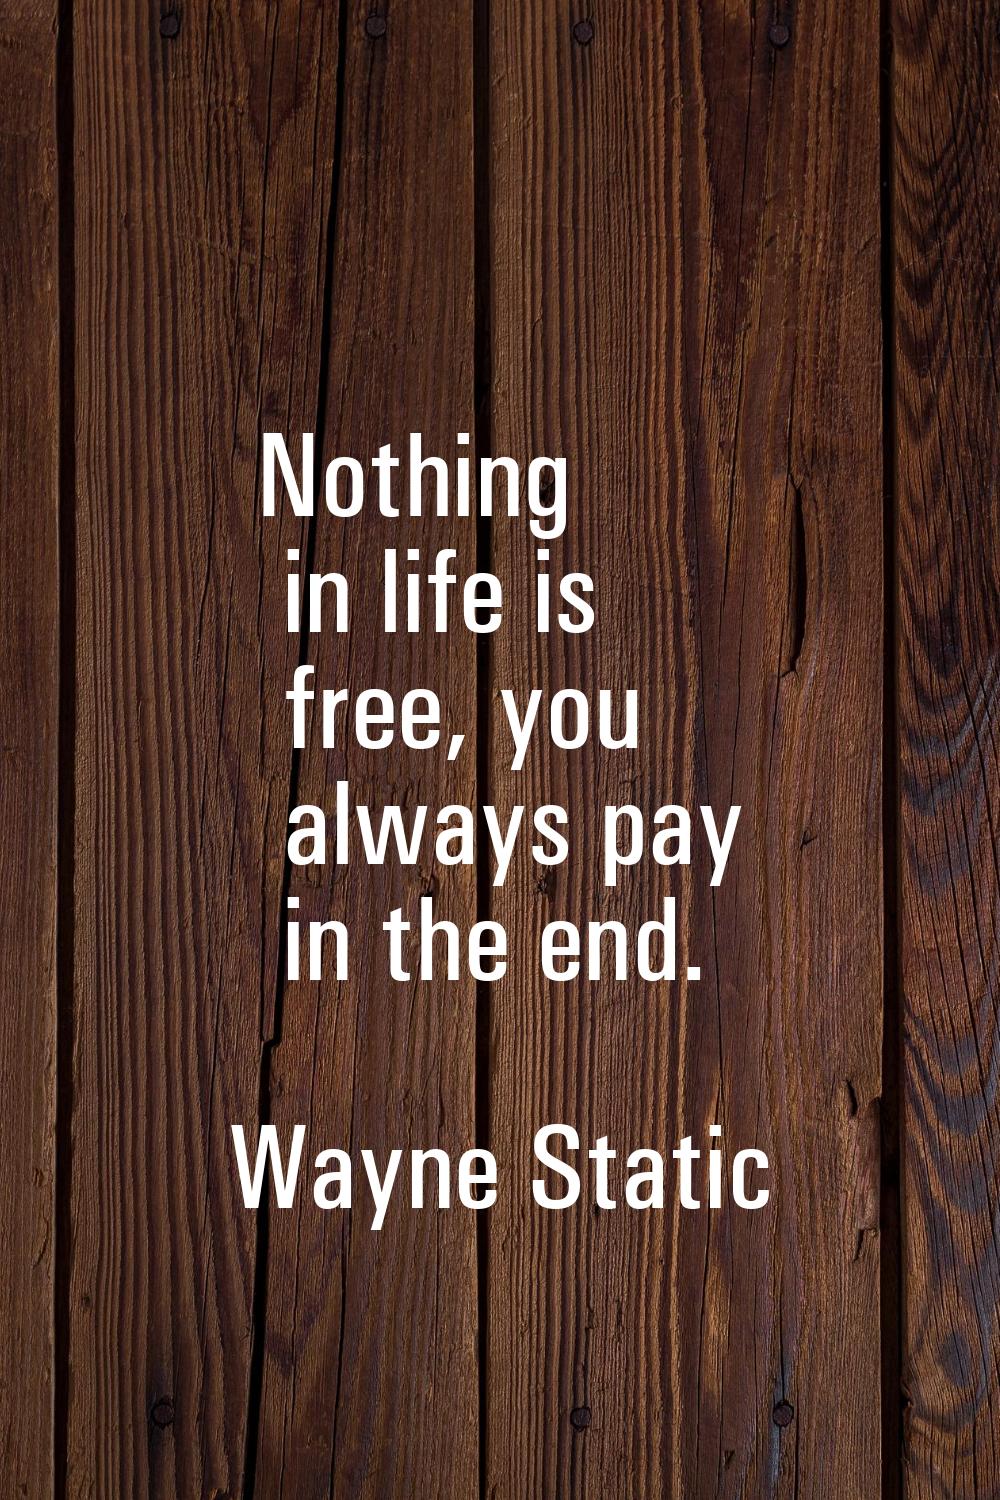 Nothing in life is free, you always pay in the end.